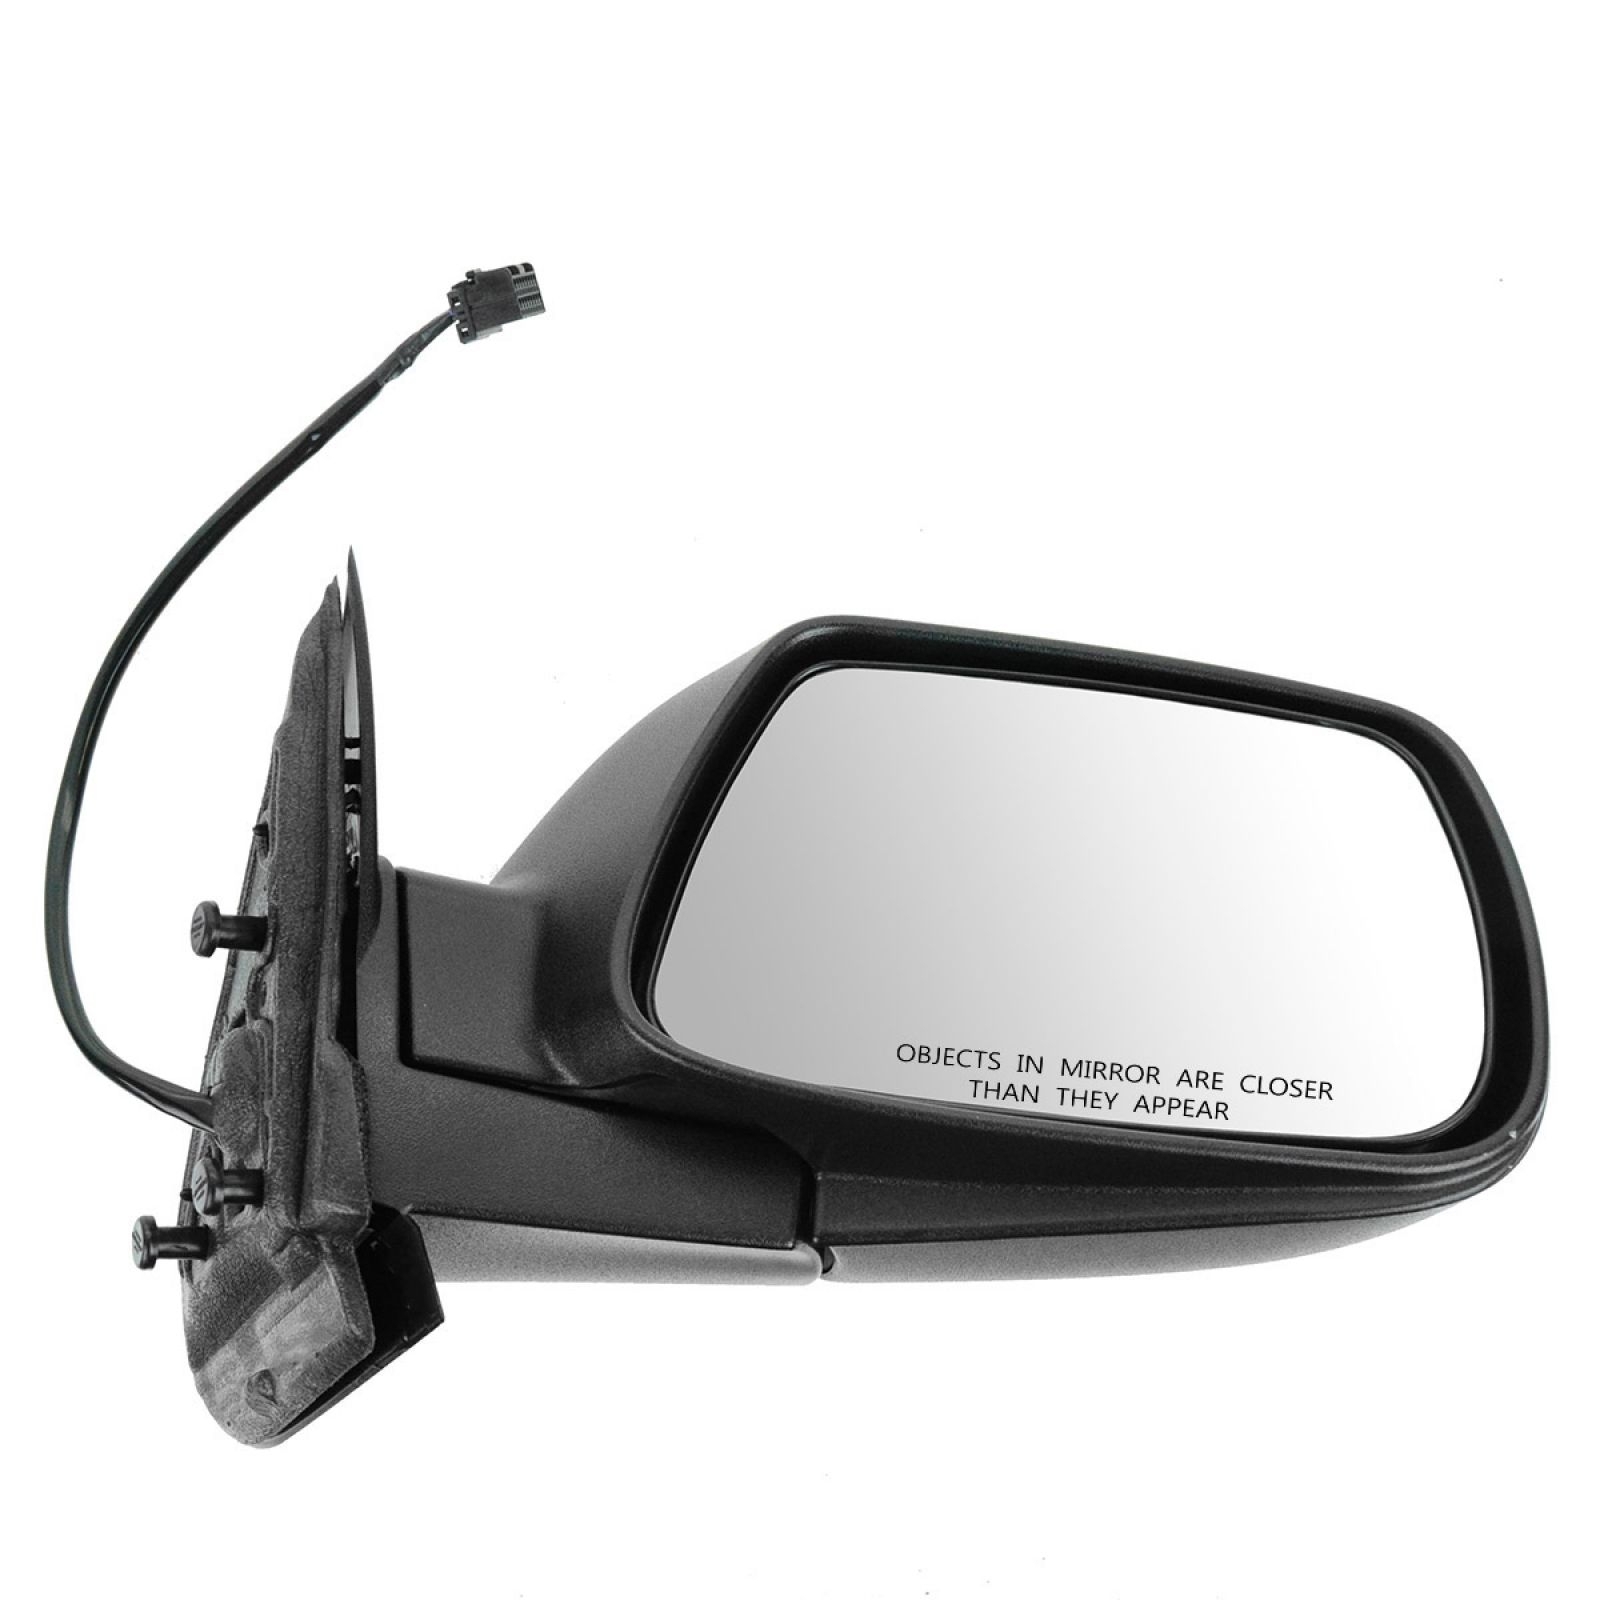 Trq Power Paint To Match Mirror For 05-10 Grand Cherokee Passenger Side, HWNV-MRA05535